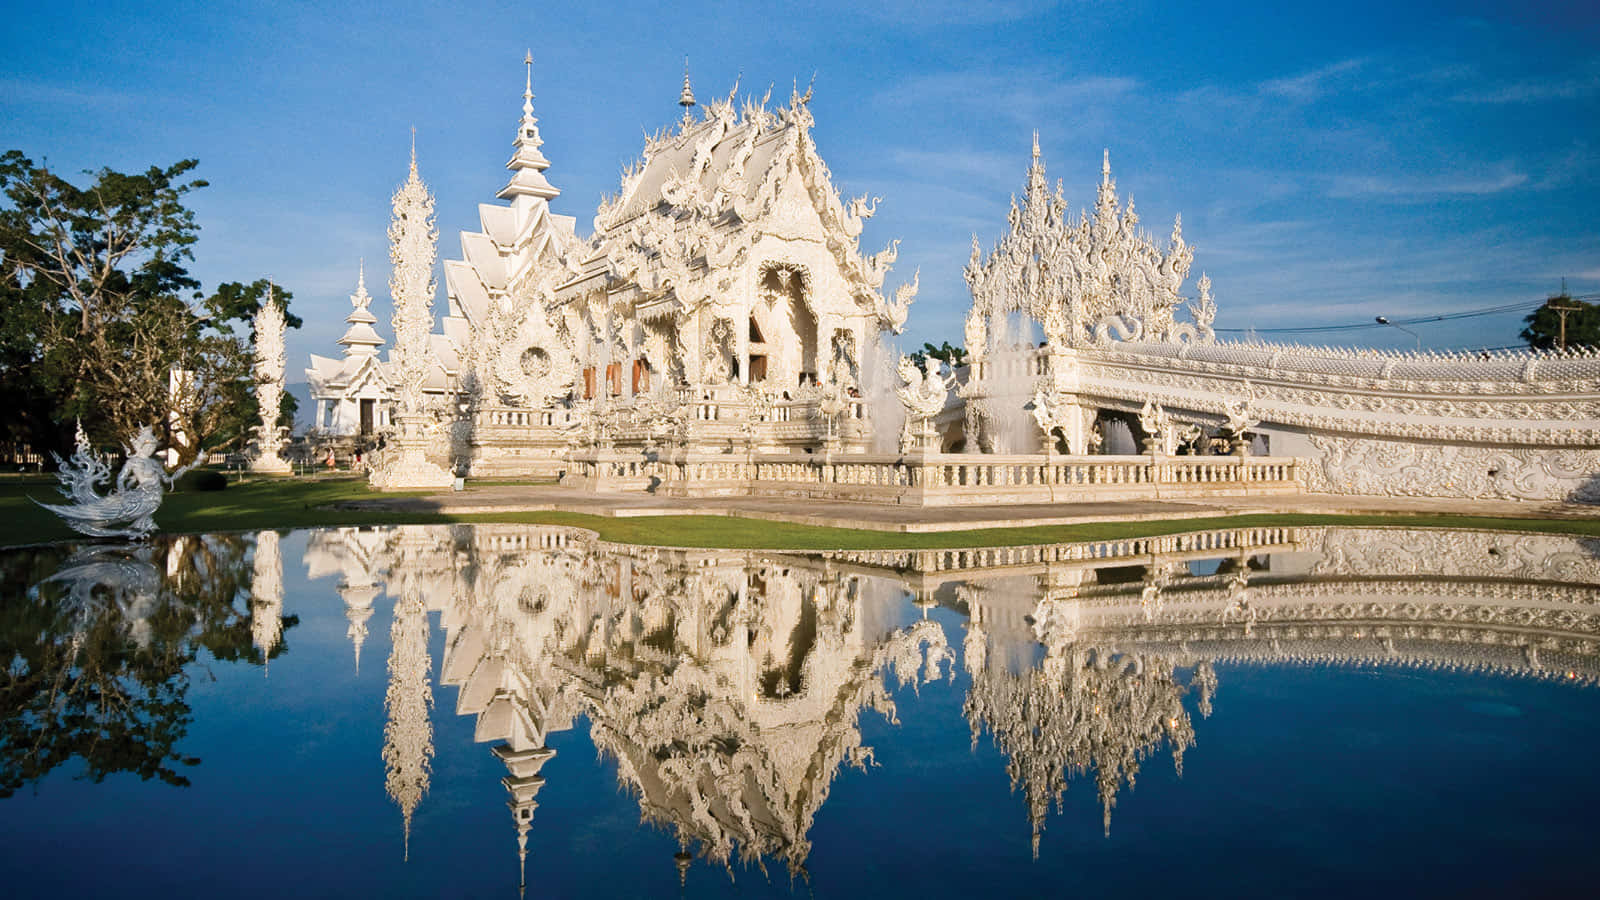 Reflection Of White Temple In Chiang Rai On The Water Wallpaper